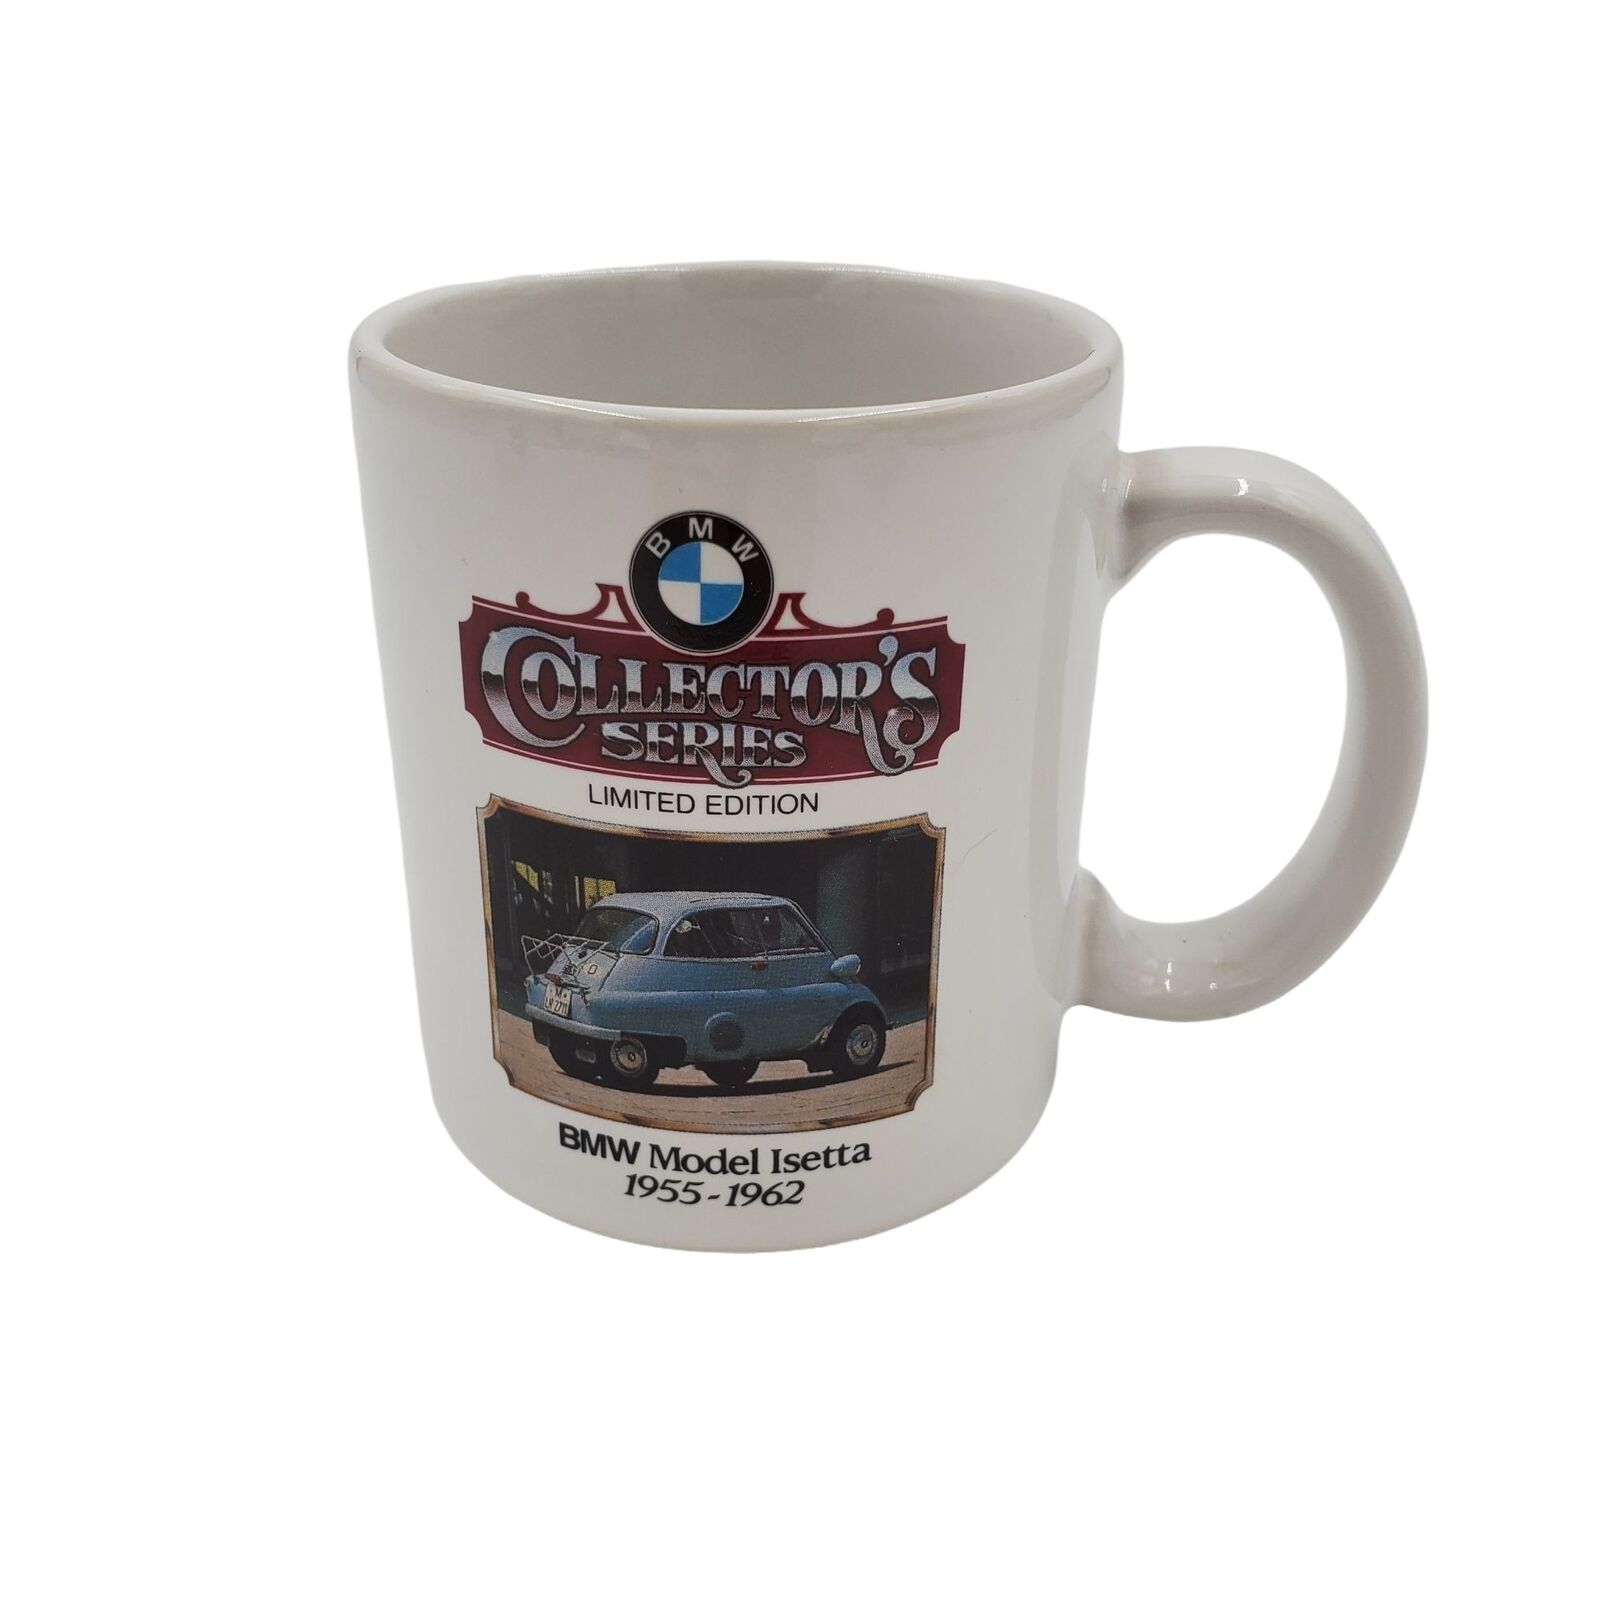 BMW Collector's Series Coffee Cup Model Isetta 1955-1962 LE 557 of 3000